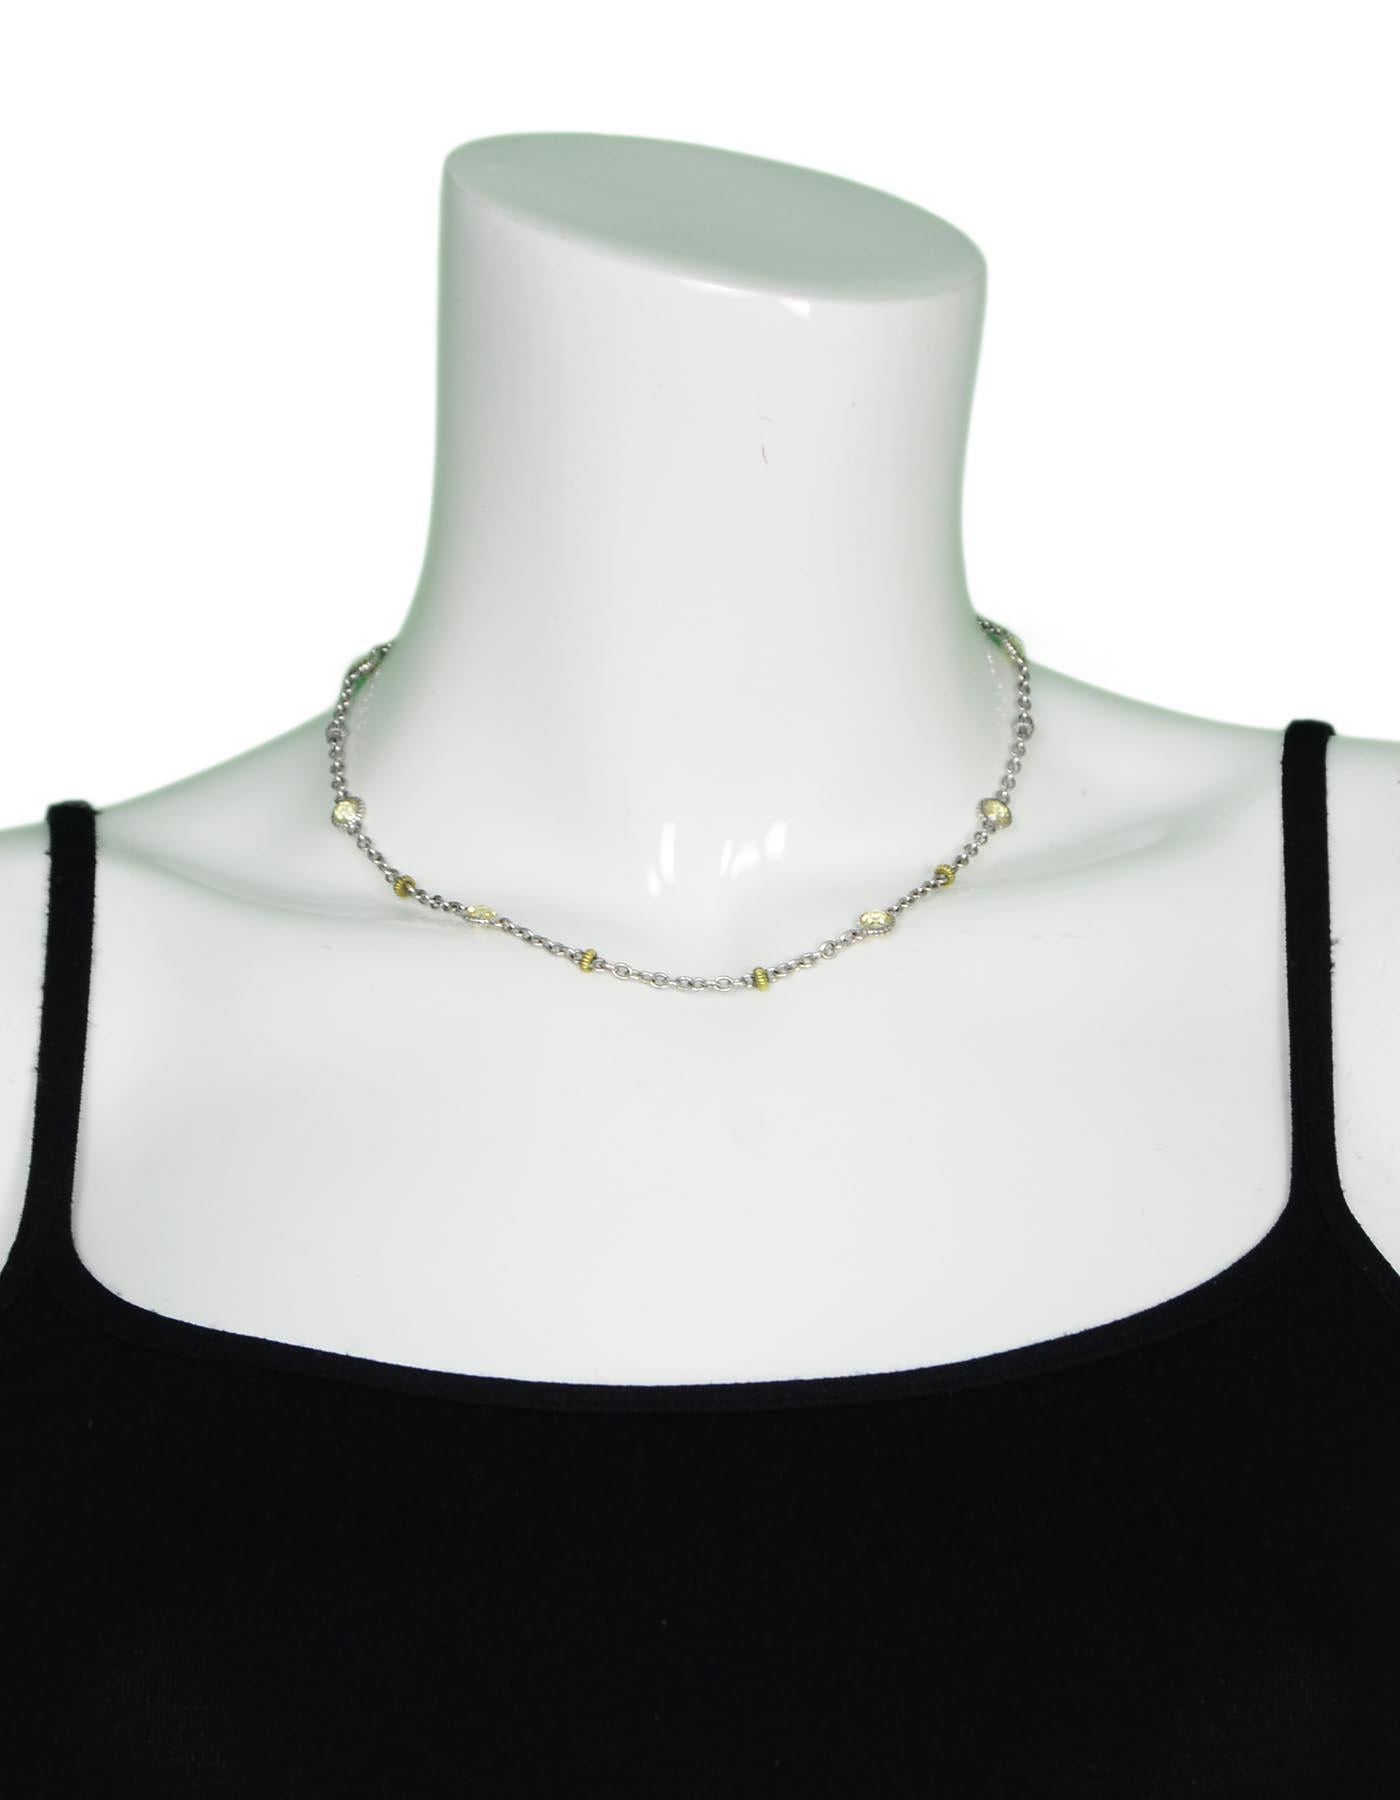 Judith Ripka Sterling Silver/18K Gold Chain Necklace W/ Faceted Canary Crystals

Color: Silver, gold, yellow
Materials:  Sterling silver, 18K gold, faceted canary crystals 
Hallmarks: On clasp- 